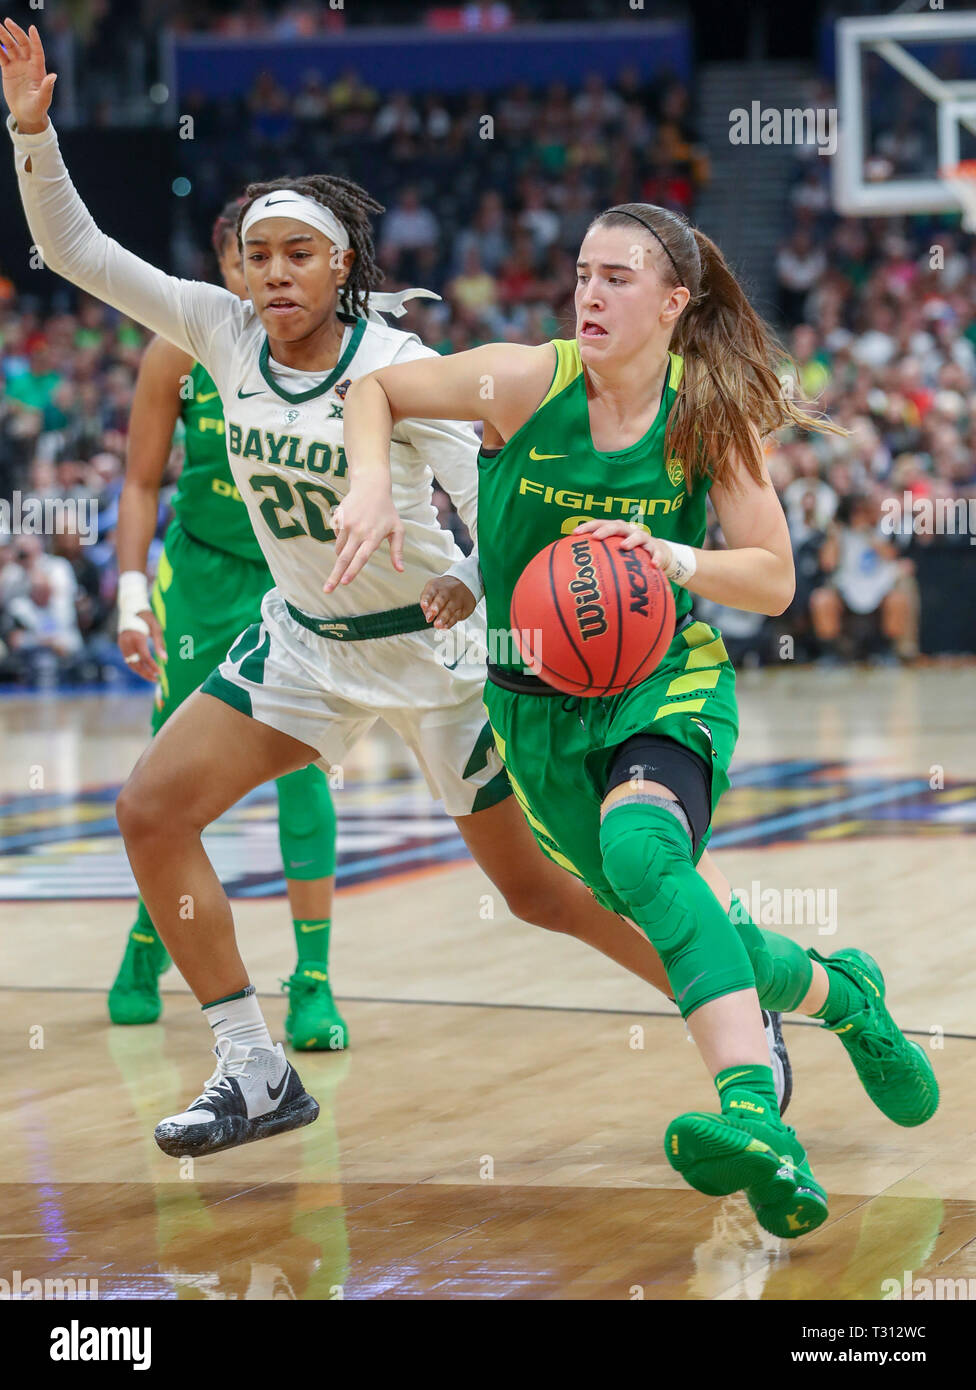 Tampa, Florida, USA. 5th Apr, 2019. DIRK SHADD | Times.Oregon Ducks guard Sabrina Ionescu (20), right, drives the lane against Baylor Lady Bears guard Juicy Landrum (20) during the second half of their NCAA Women's Final Four semi-final game Friday, April 5, 2019 in Tampa. Credit: Dirk Shadd/Tampa Bay Times/ZUMA Wire/Alamy Live News Stock Photo